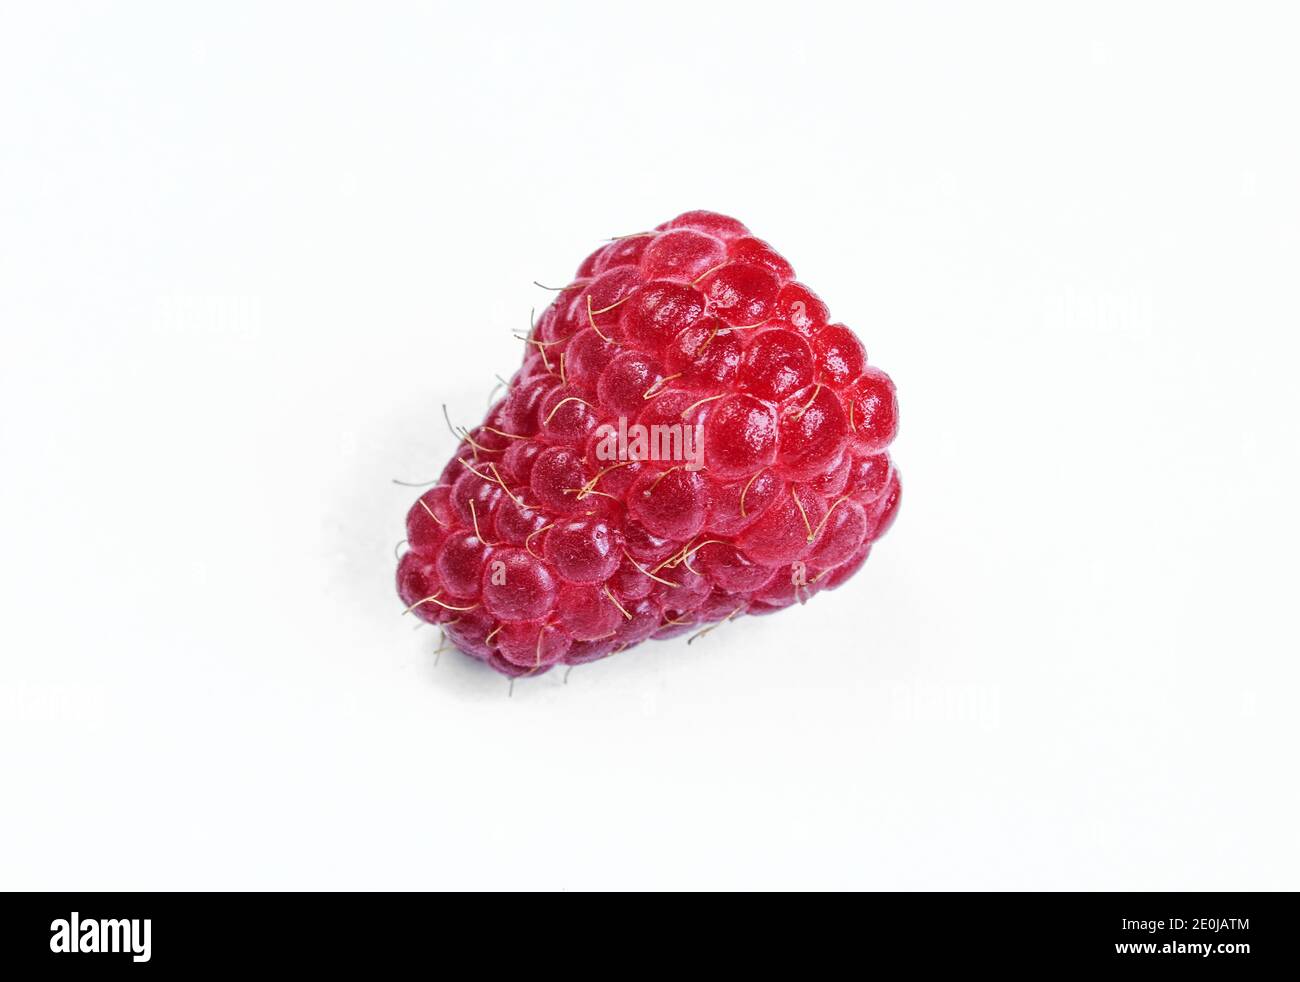 Single red raspberry isolated on white background. Close-up and detailed Stock Photo